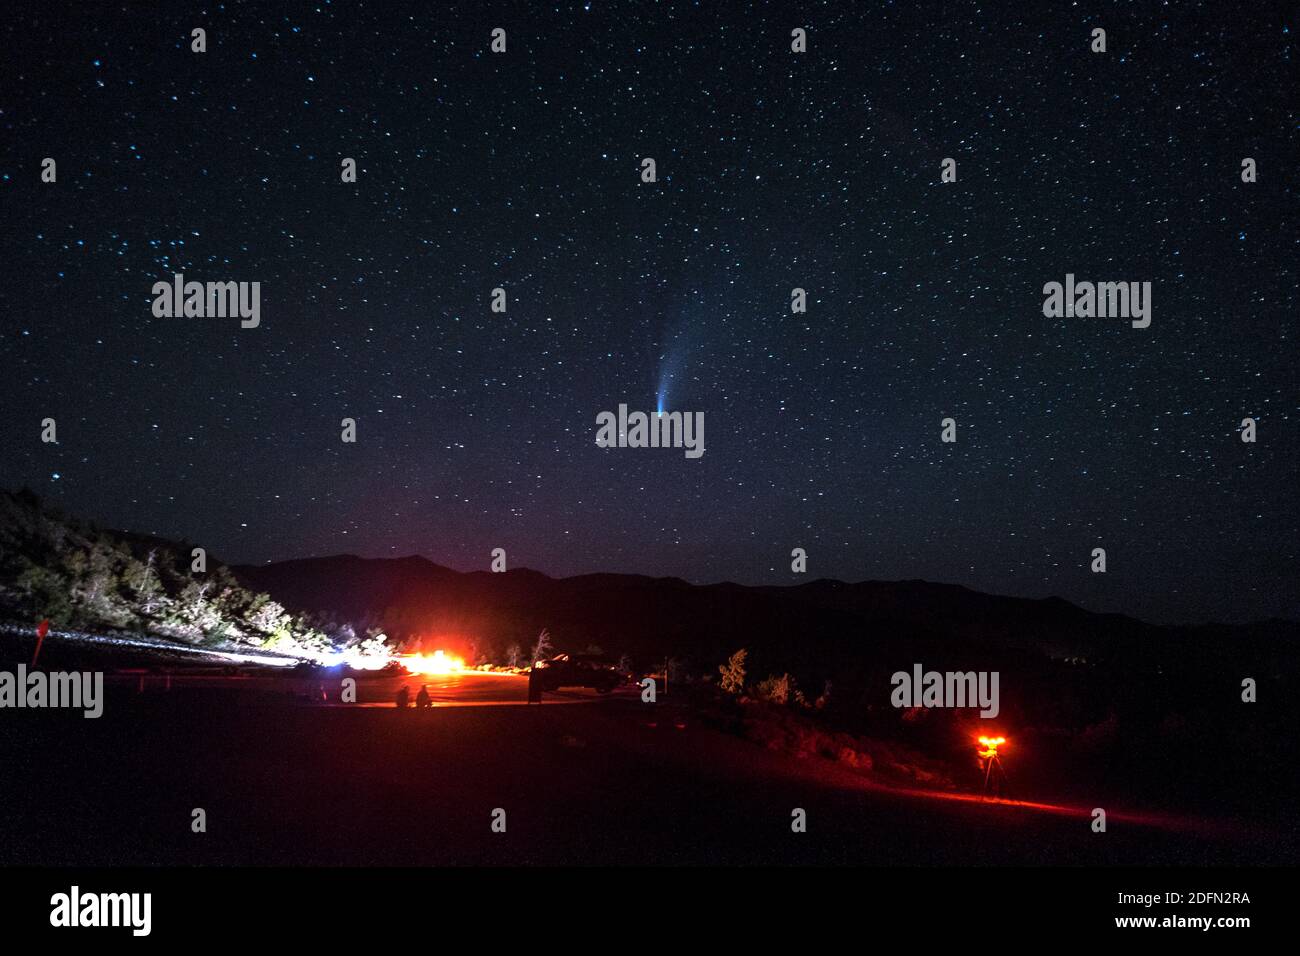 Craters of the Moon, Idaho, Comet Neowise, starry night sky Stock Photo